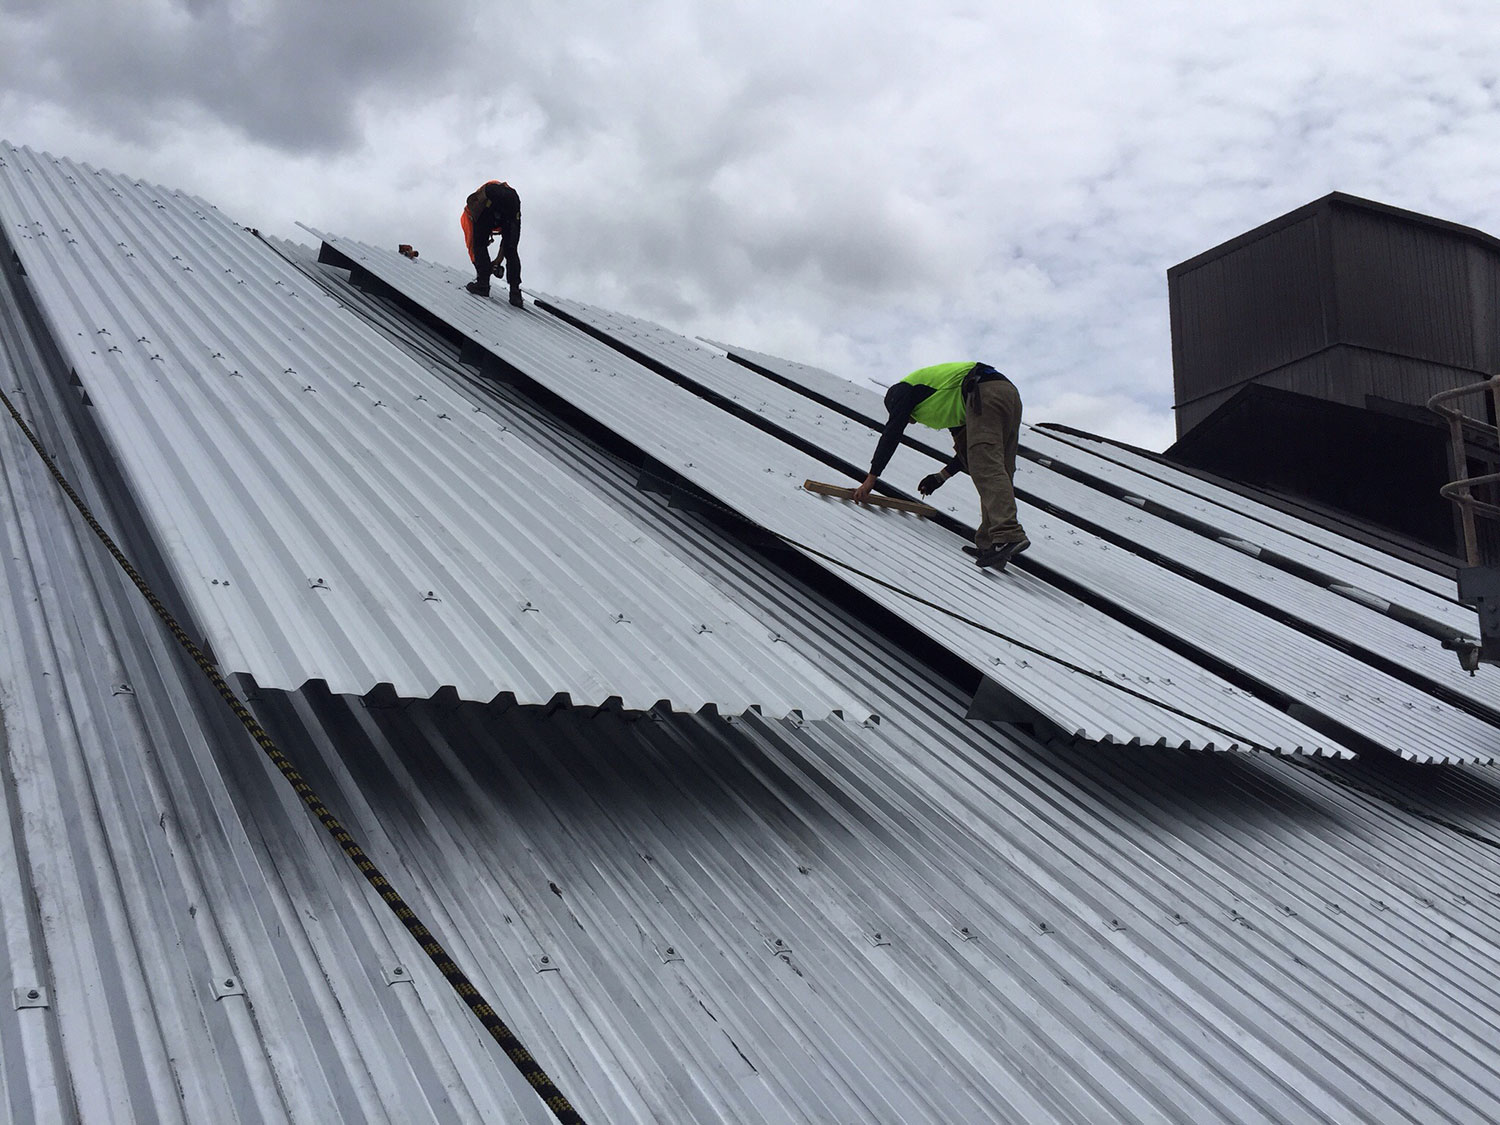 auckland roofing solutions services auckland and new zealand wide new roofs repair cladding and more Project gallery 8